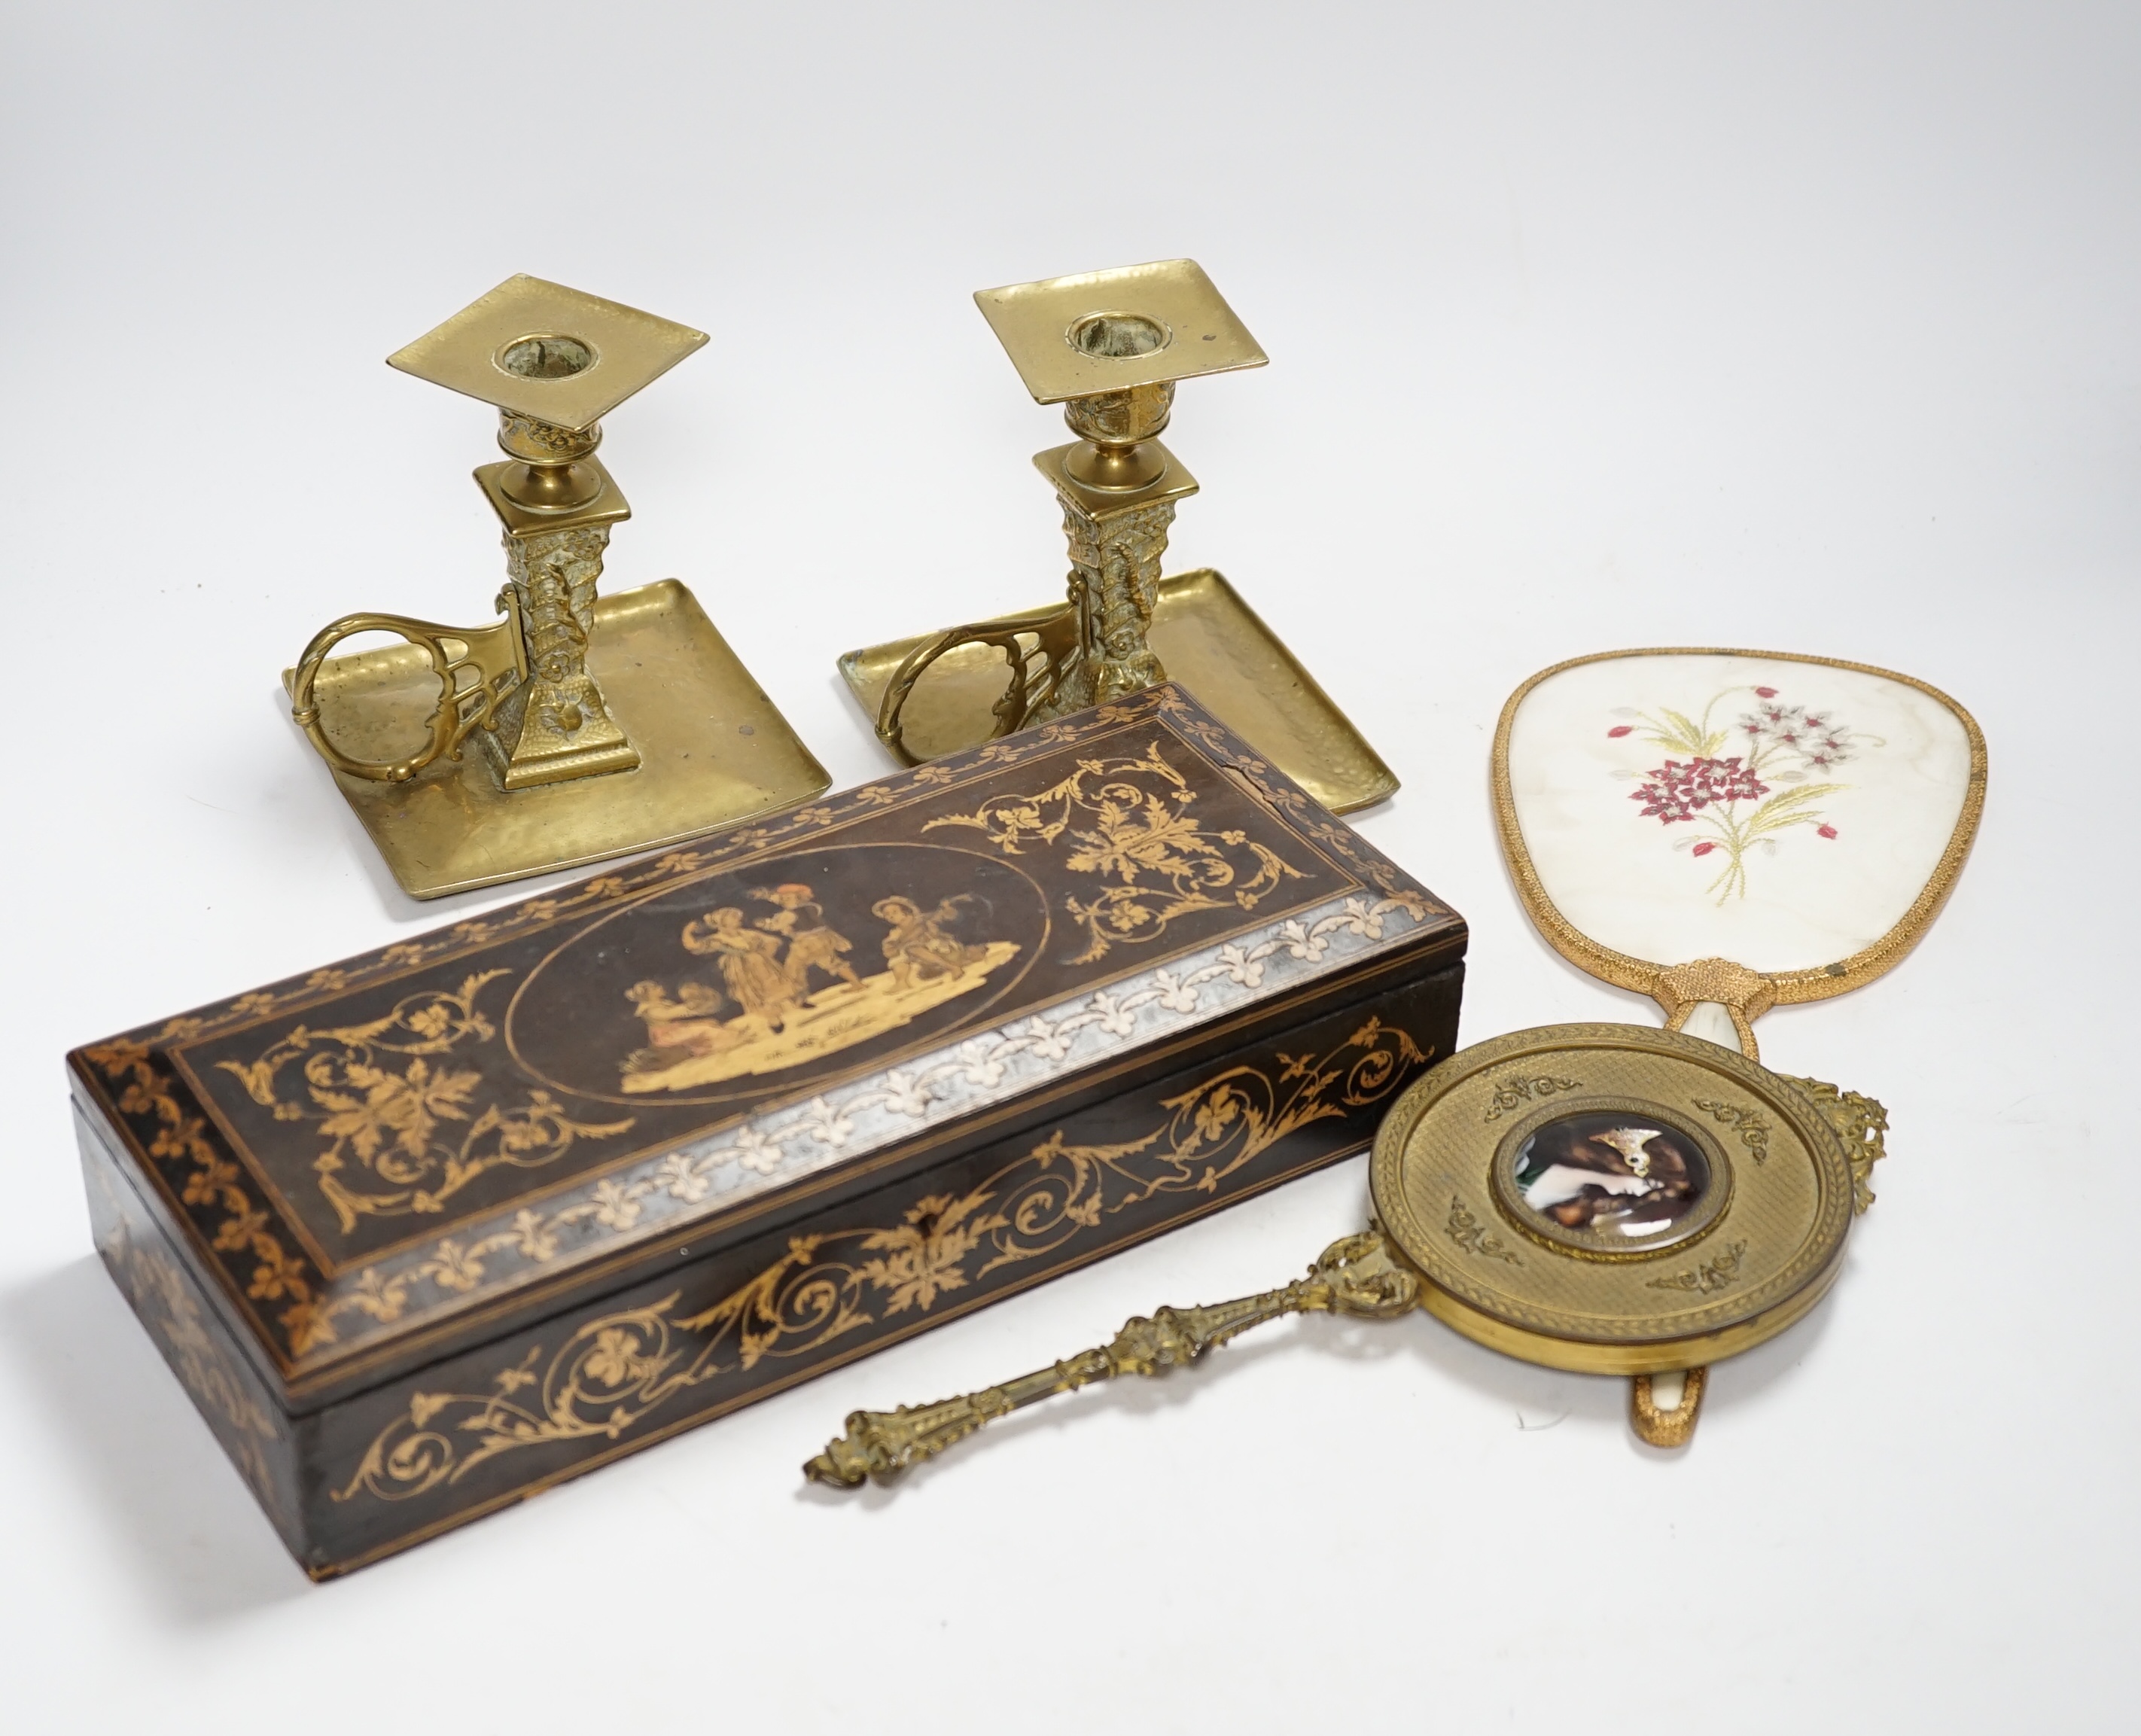 An inlaid Sorrento style box, a gilt hand mirror with enamel cartouche, a pair of brass candle holders and another hand mirror, box 30cm wide                                                                               